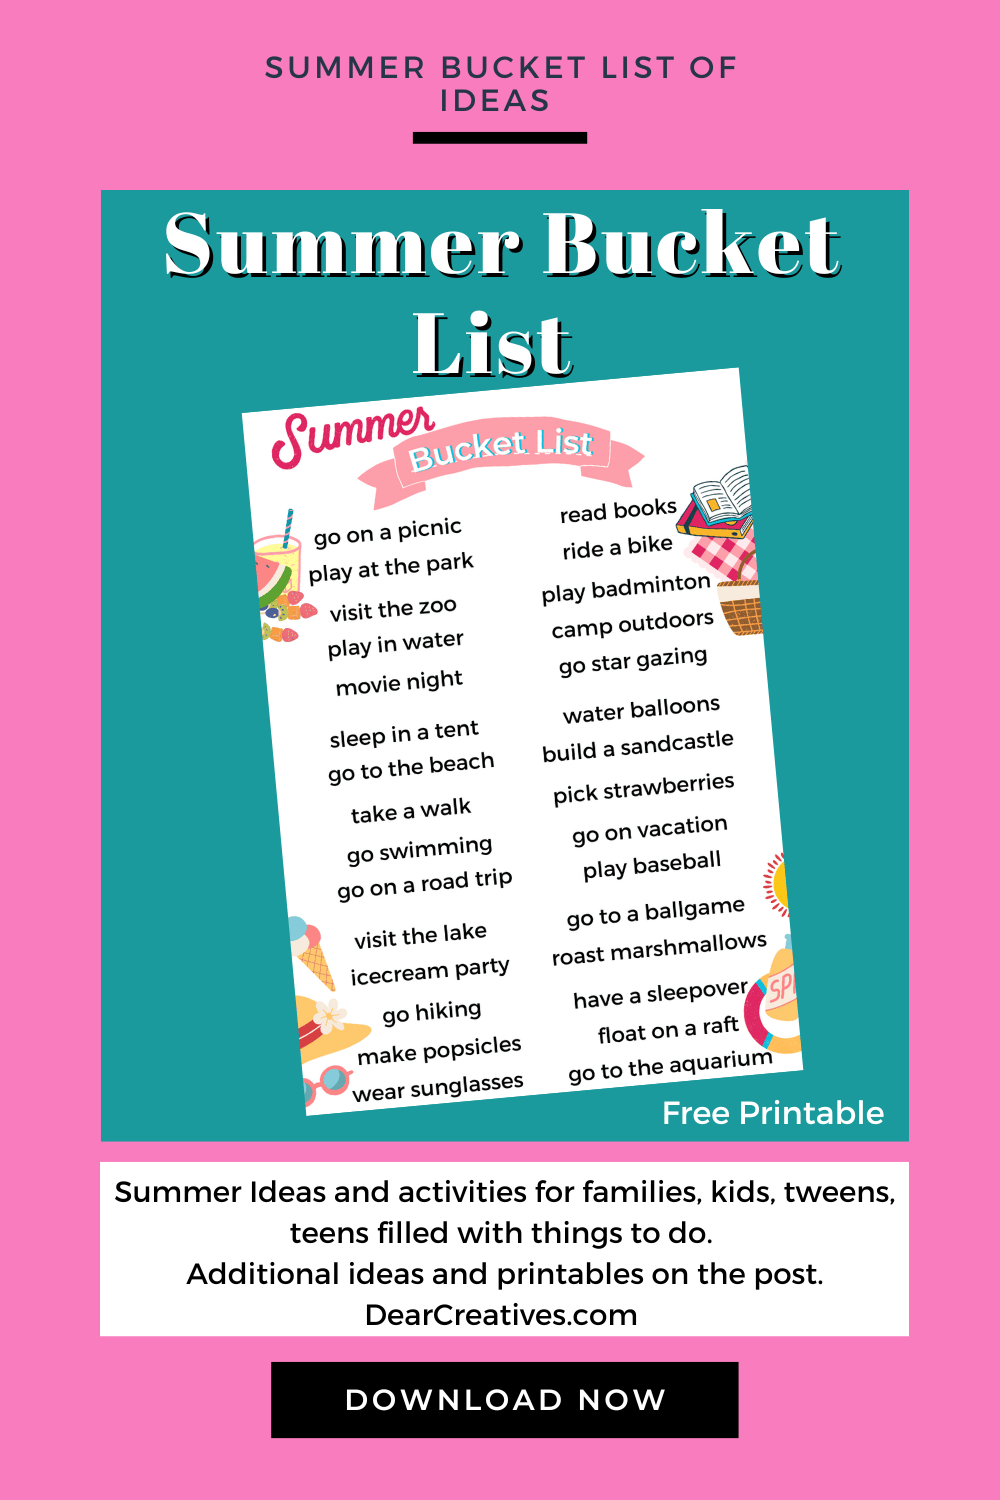 Summer Bucket List - Ideas and activities for families, kids, tweens, teens filled with things to do. Additional ideas on the post. Print the list of ideas for summer at DearCreatives.com